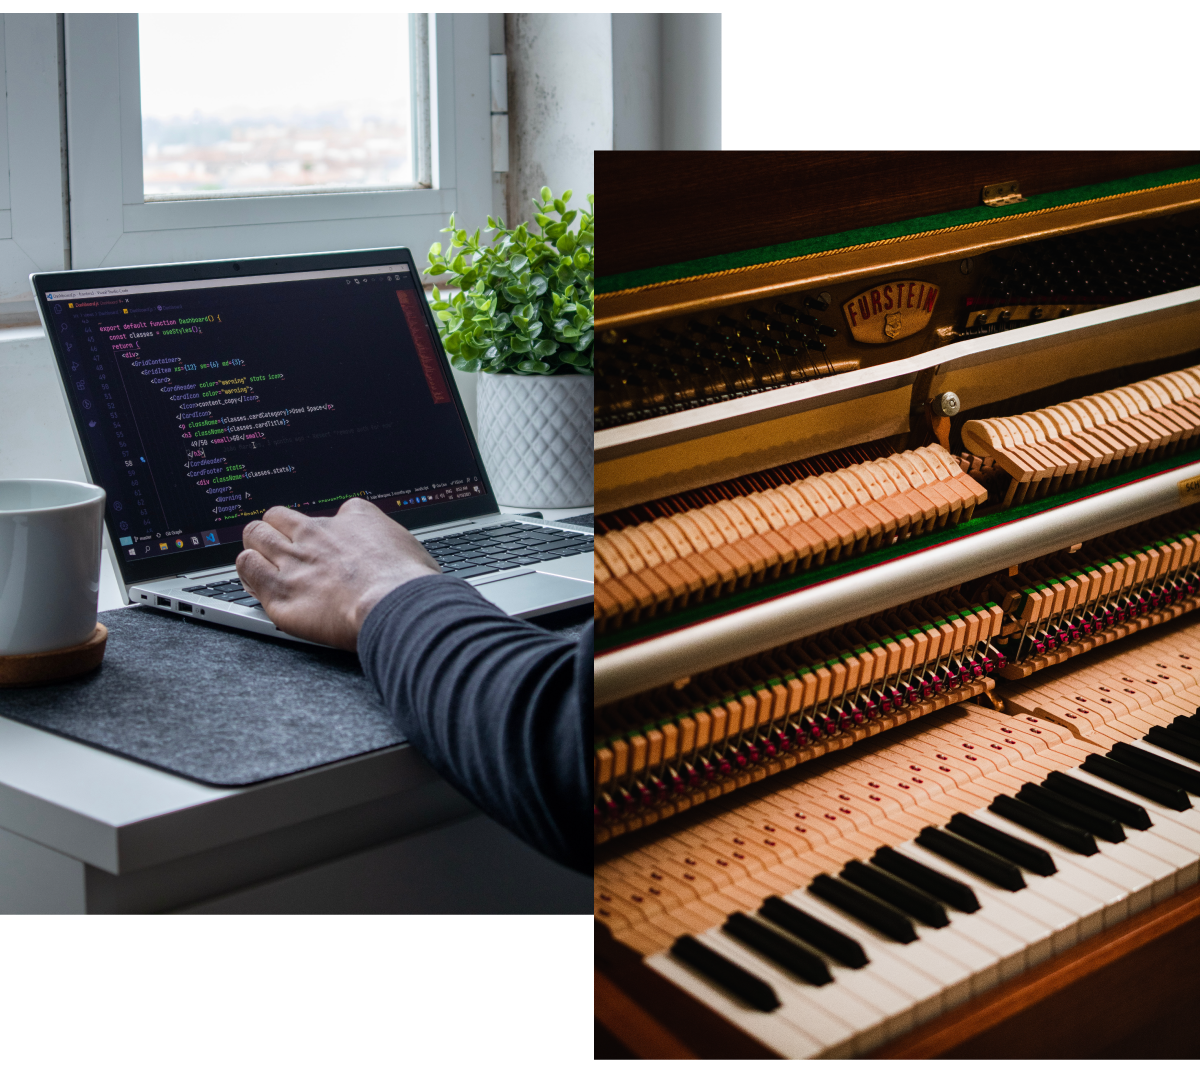 A collage: 1) Someone coding on a laptop. 2) A close-up of a piano.